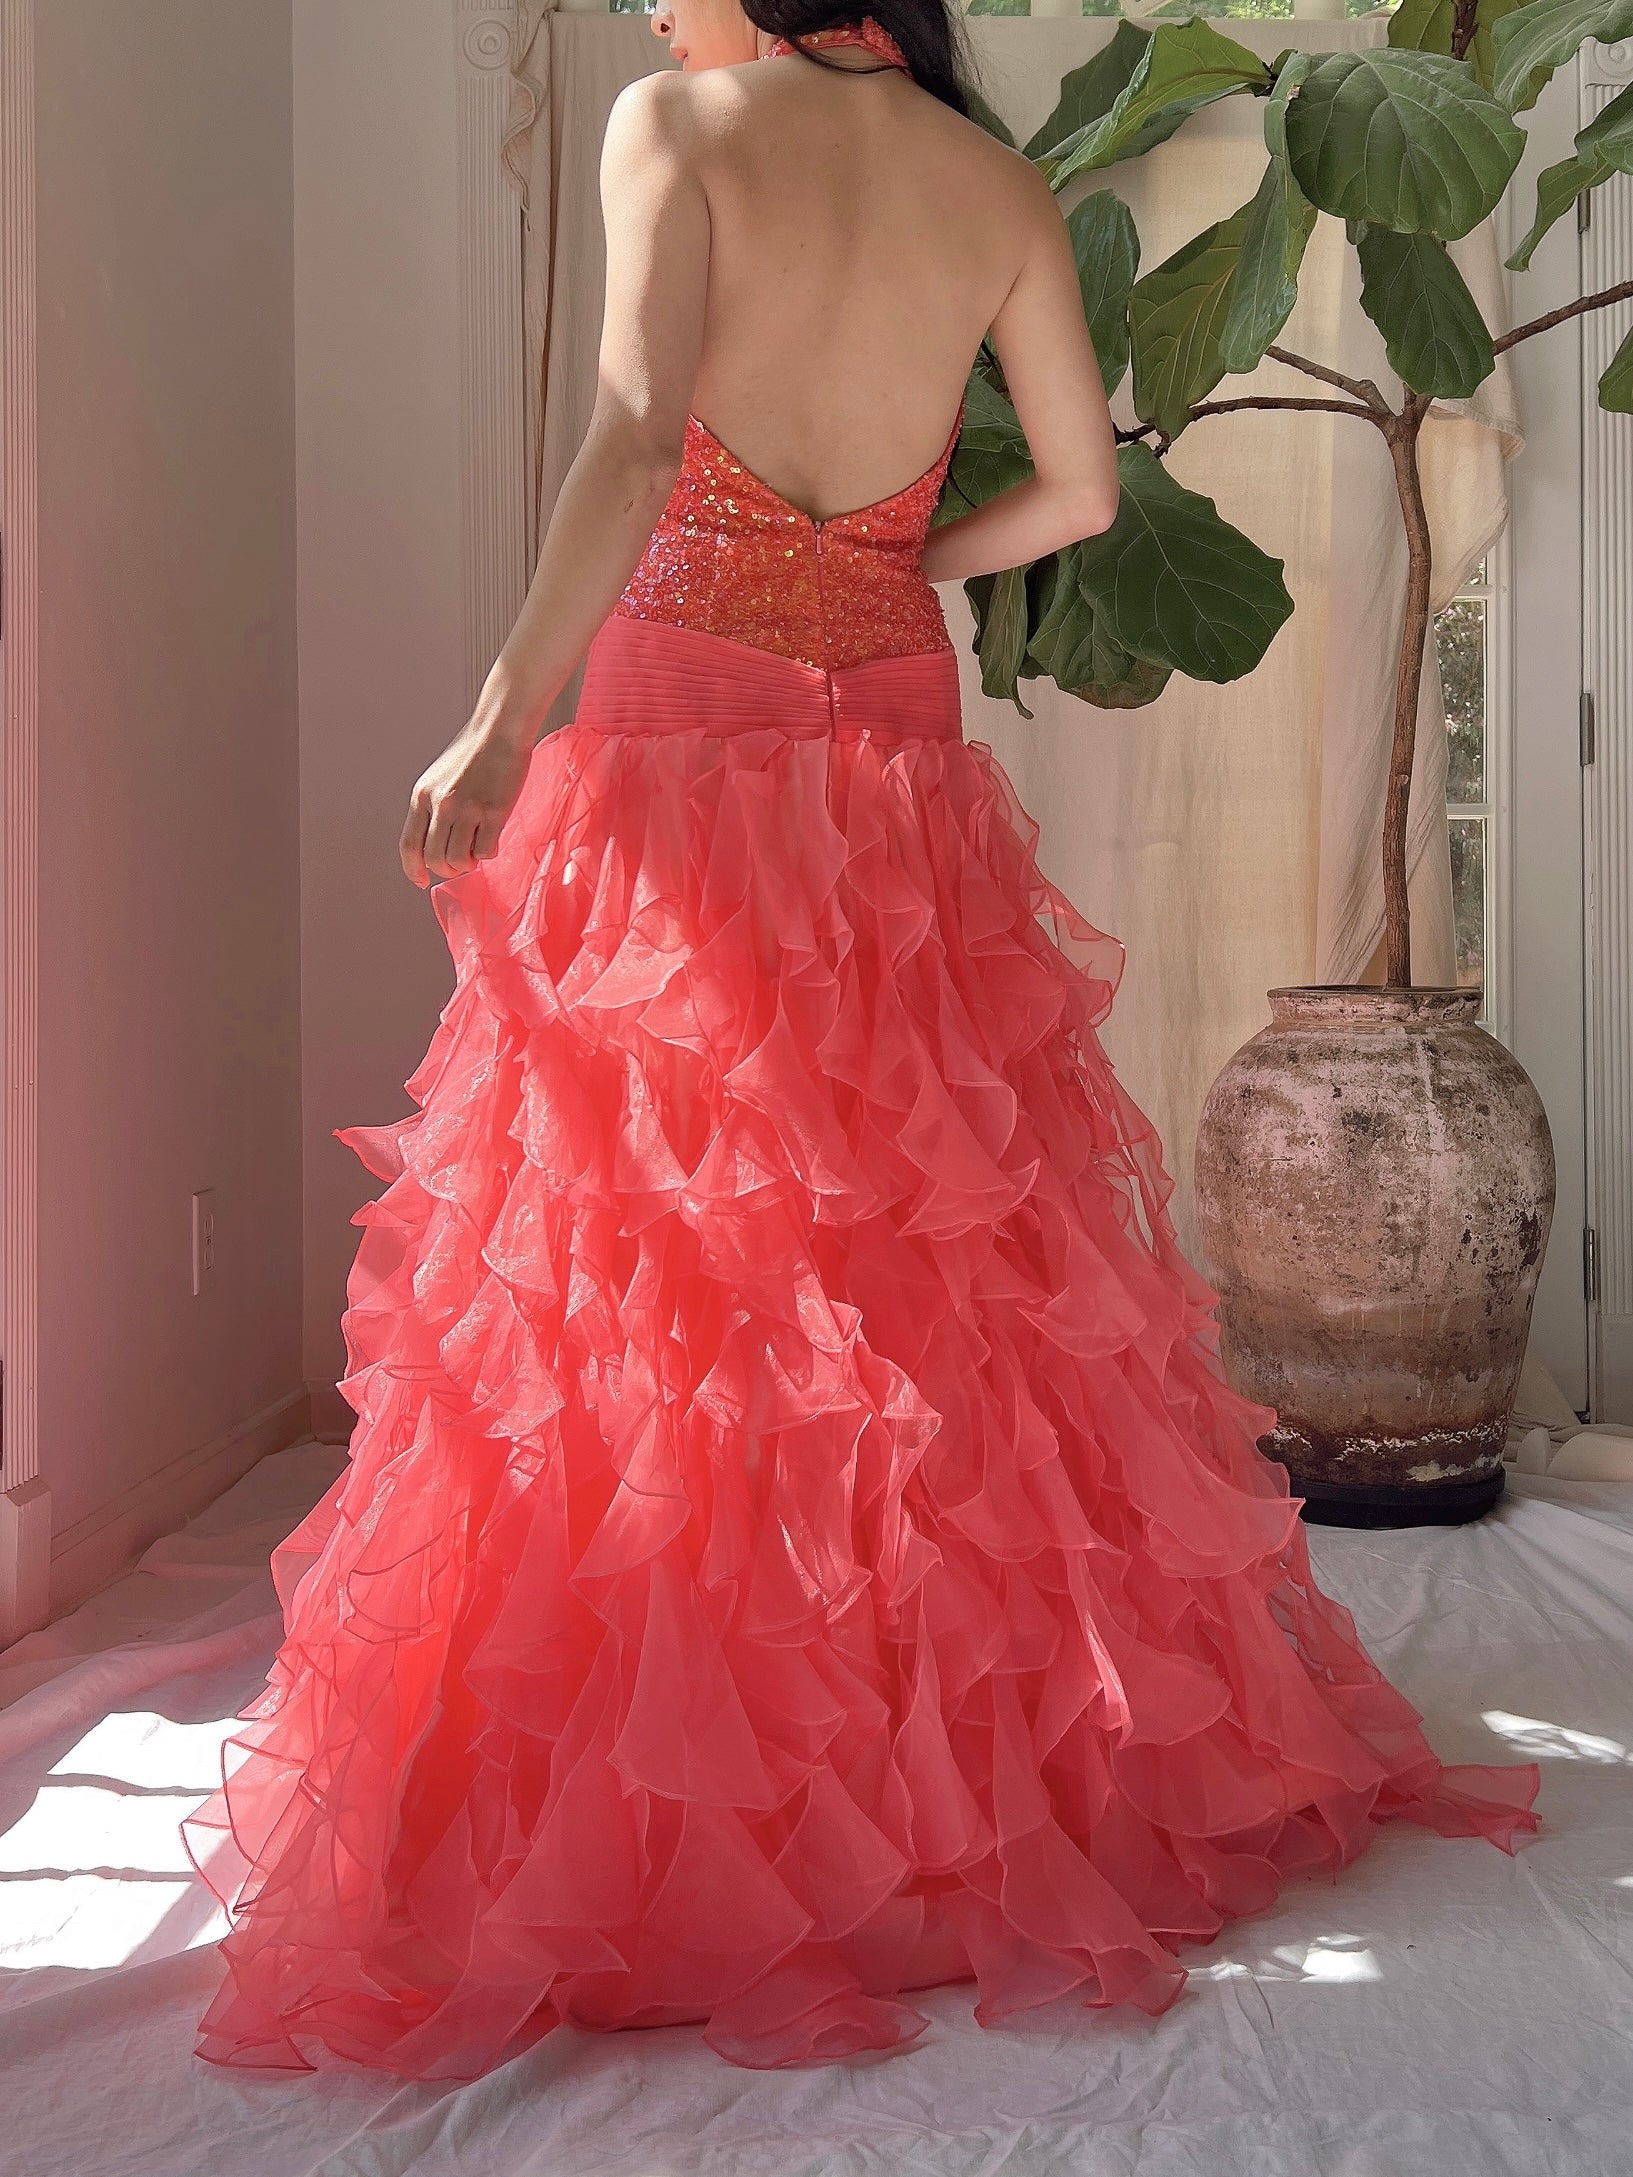 Vintage Coral Sequins Ruffle Skirt Gown - S